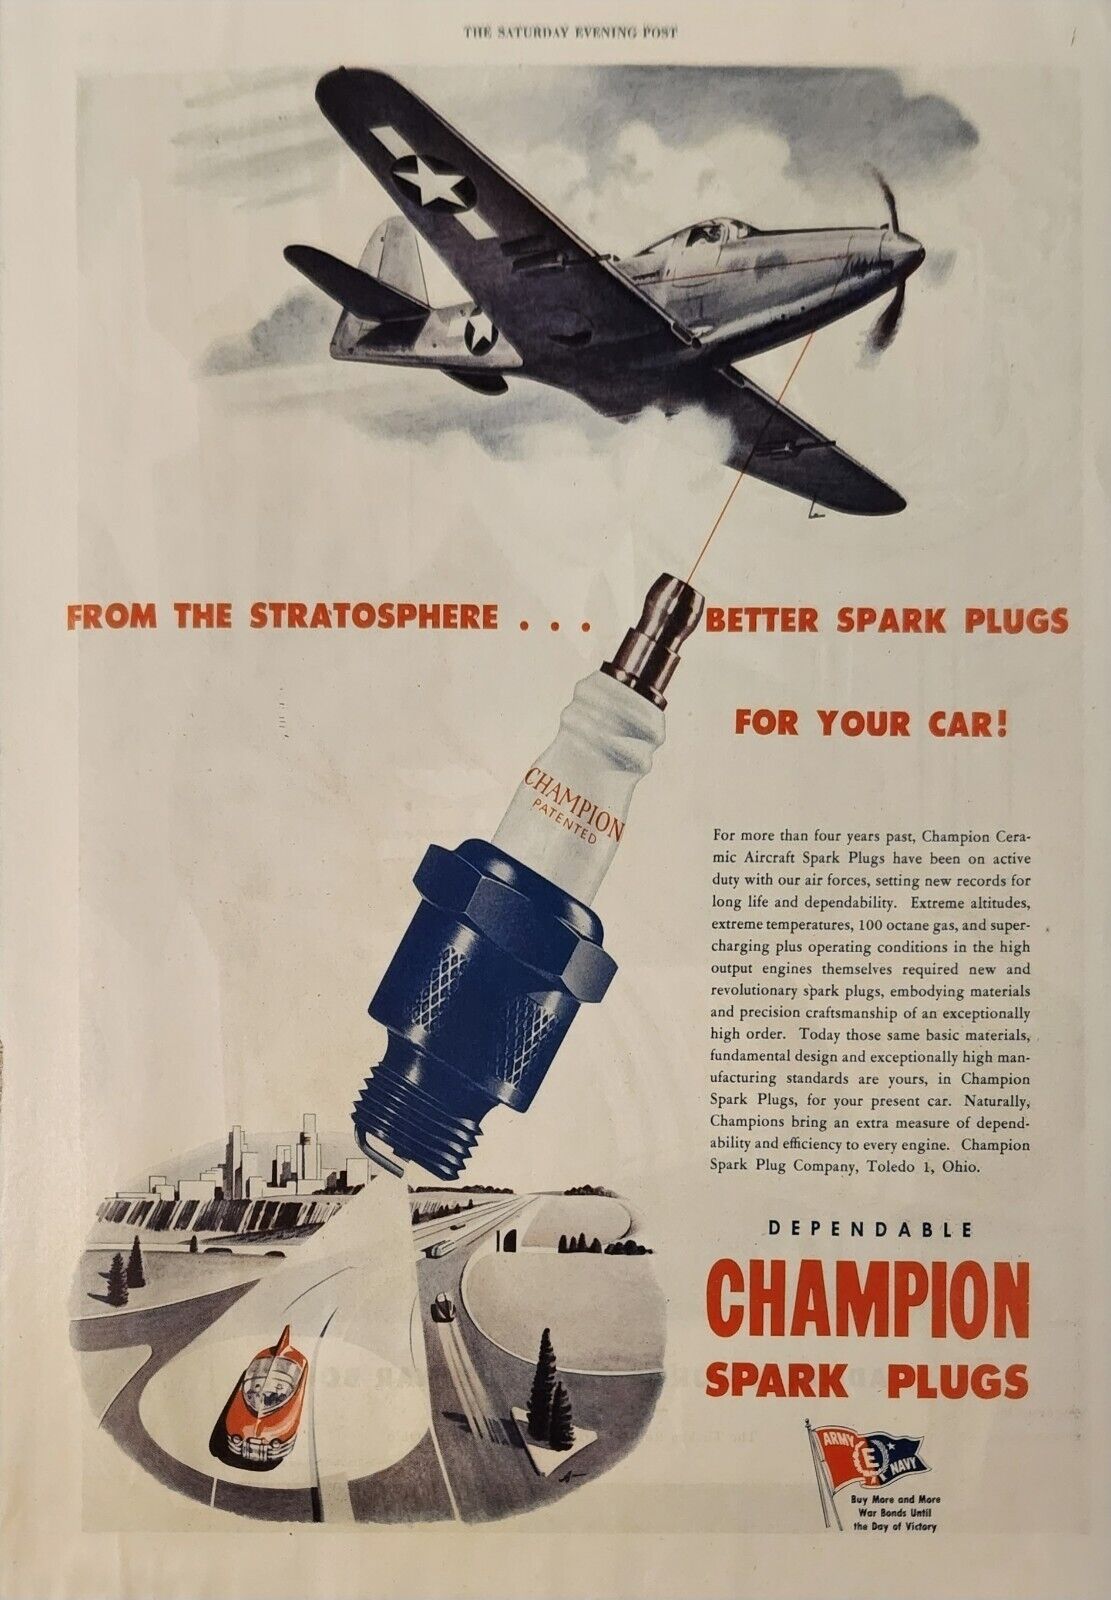 1945 Champion Spark Plugs Vintage Ad from the stratosphere